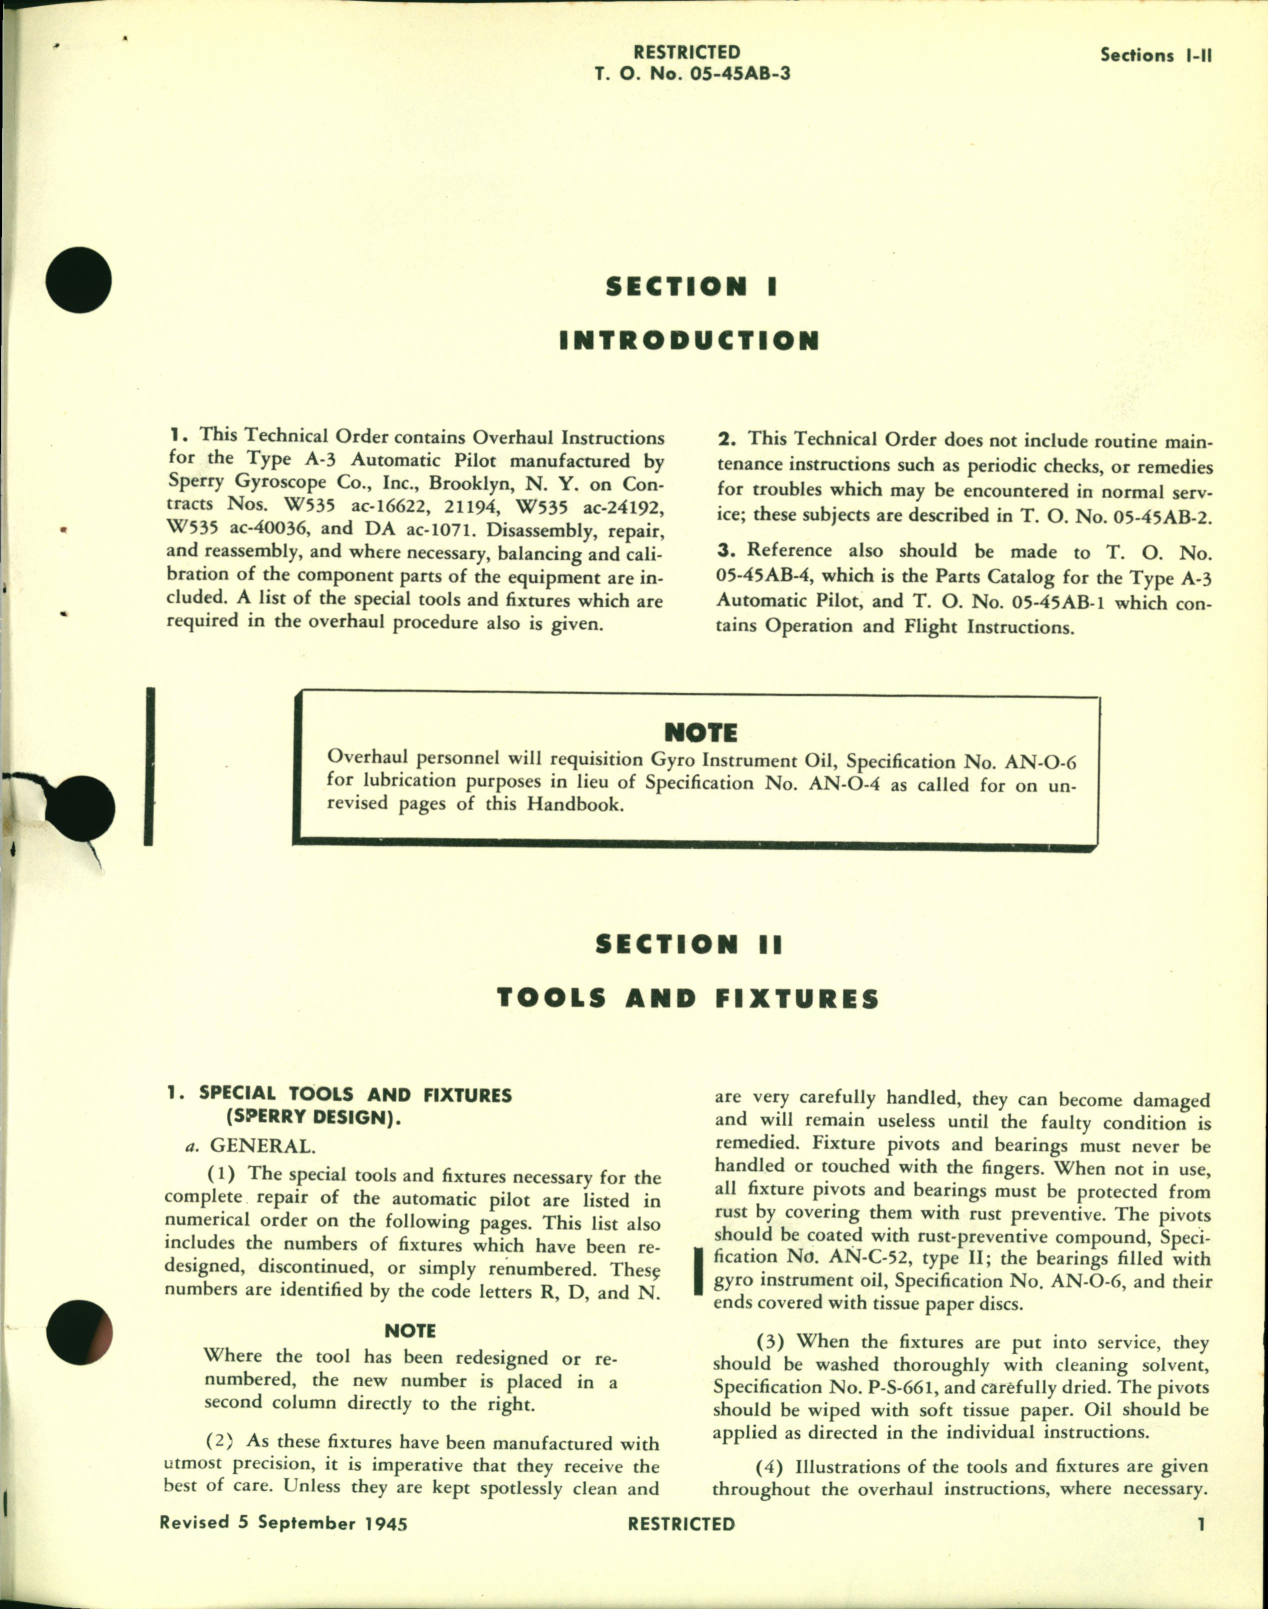 Sample page 5 from AirCorps Library document: Overhaul Instructions for Automatic Pilot Type A-3